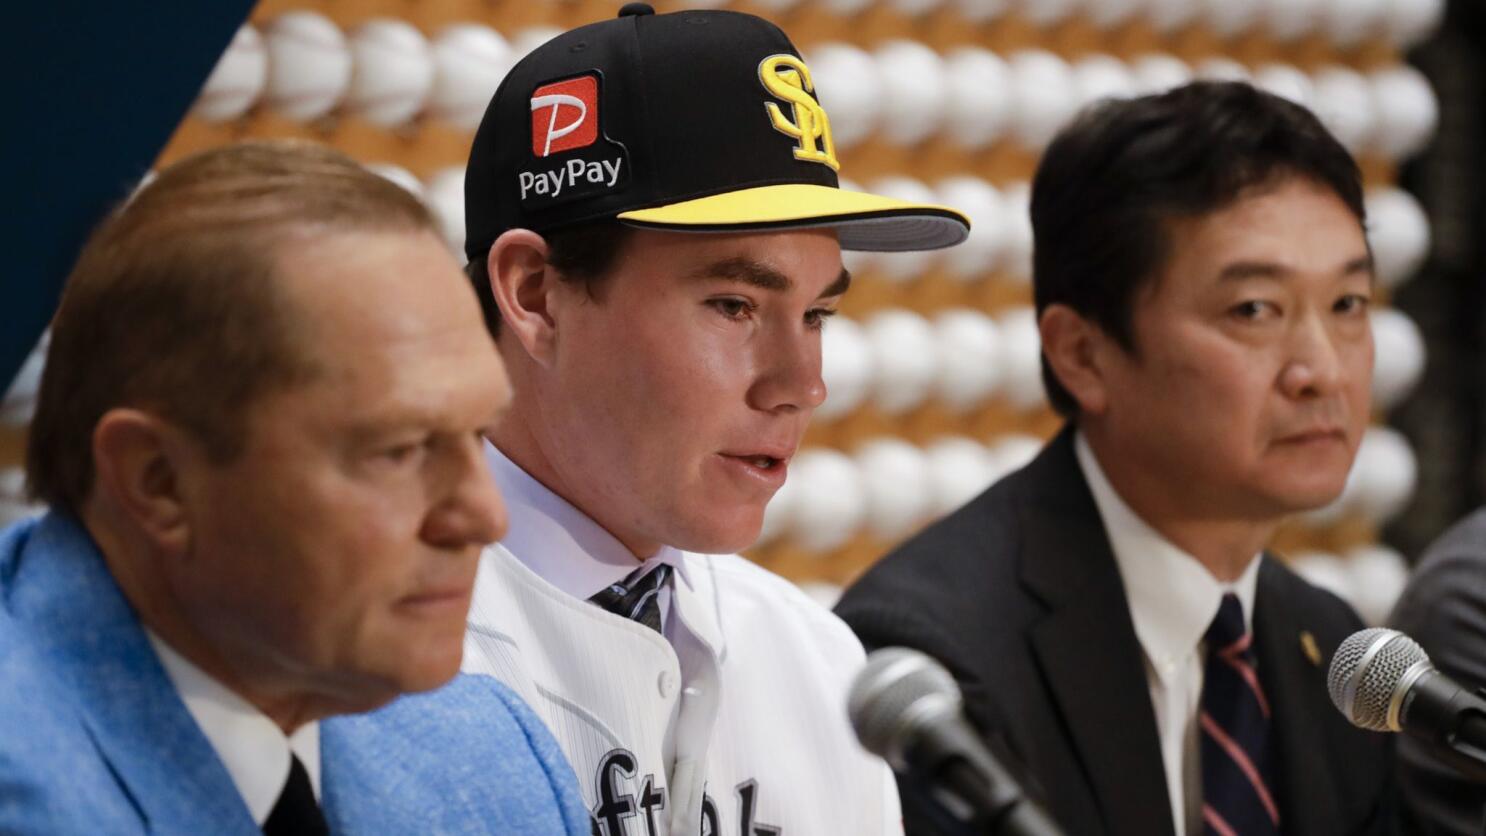 Carter Stewart, 19, Chooses Japan Over the M.L.B. Draft - The New